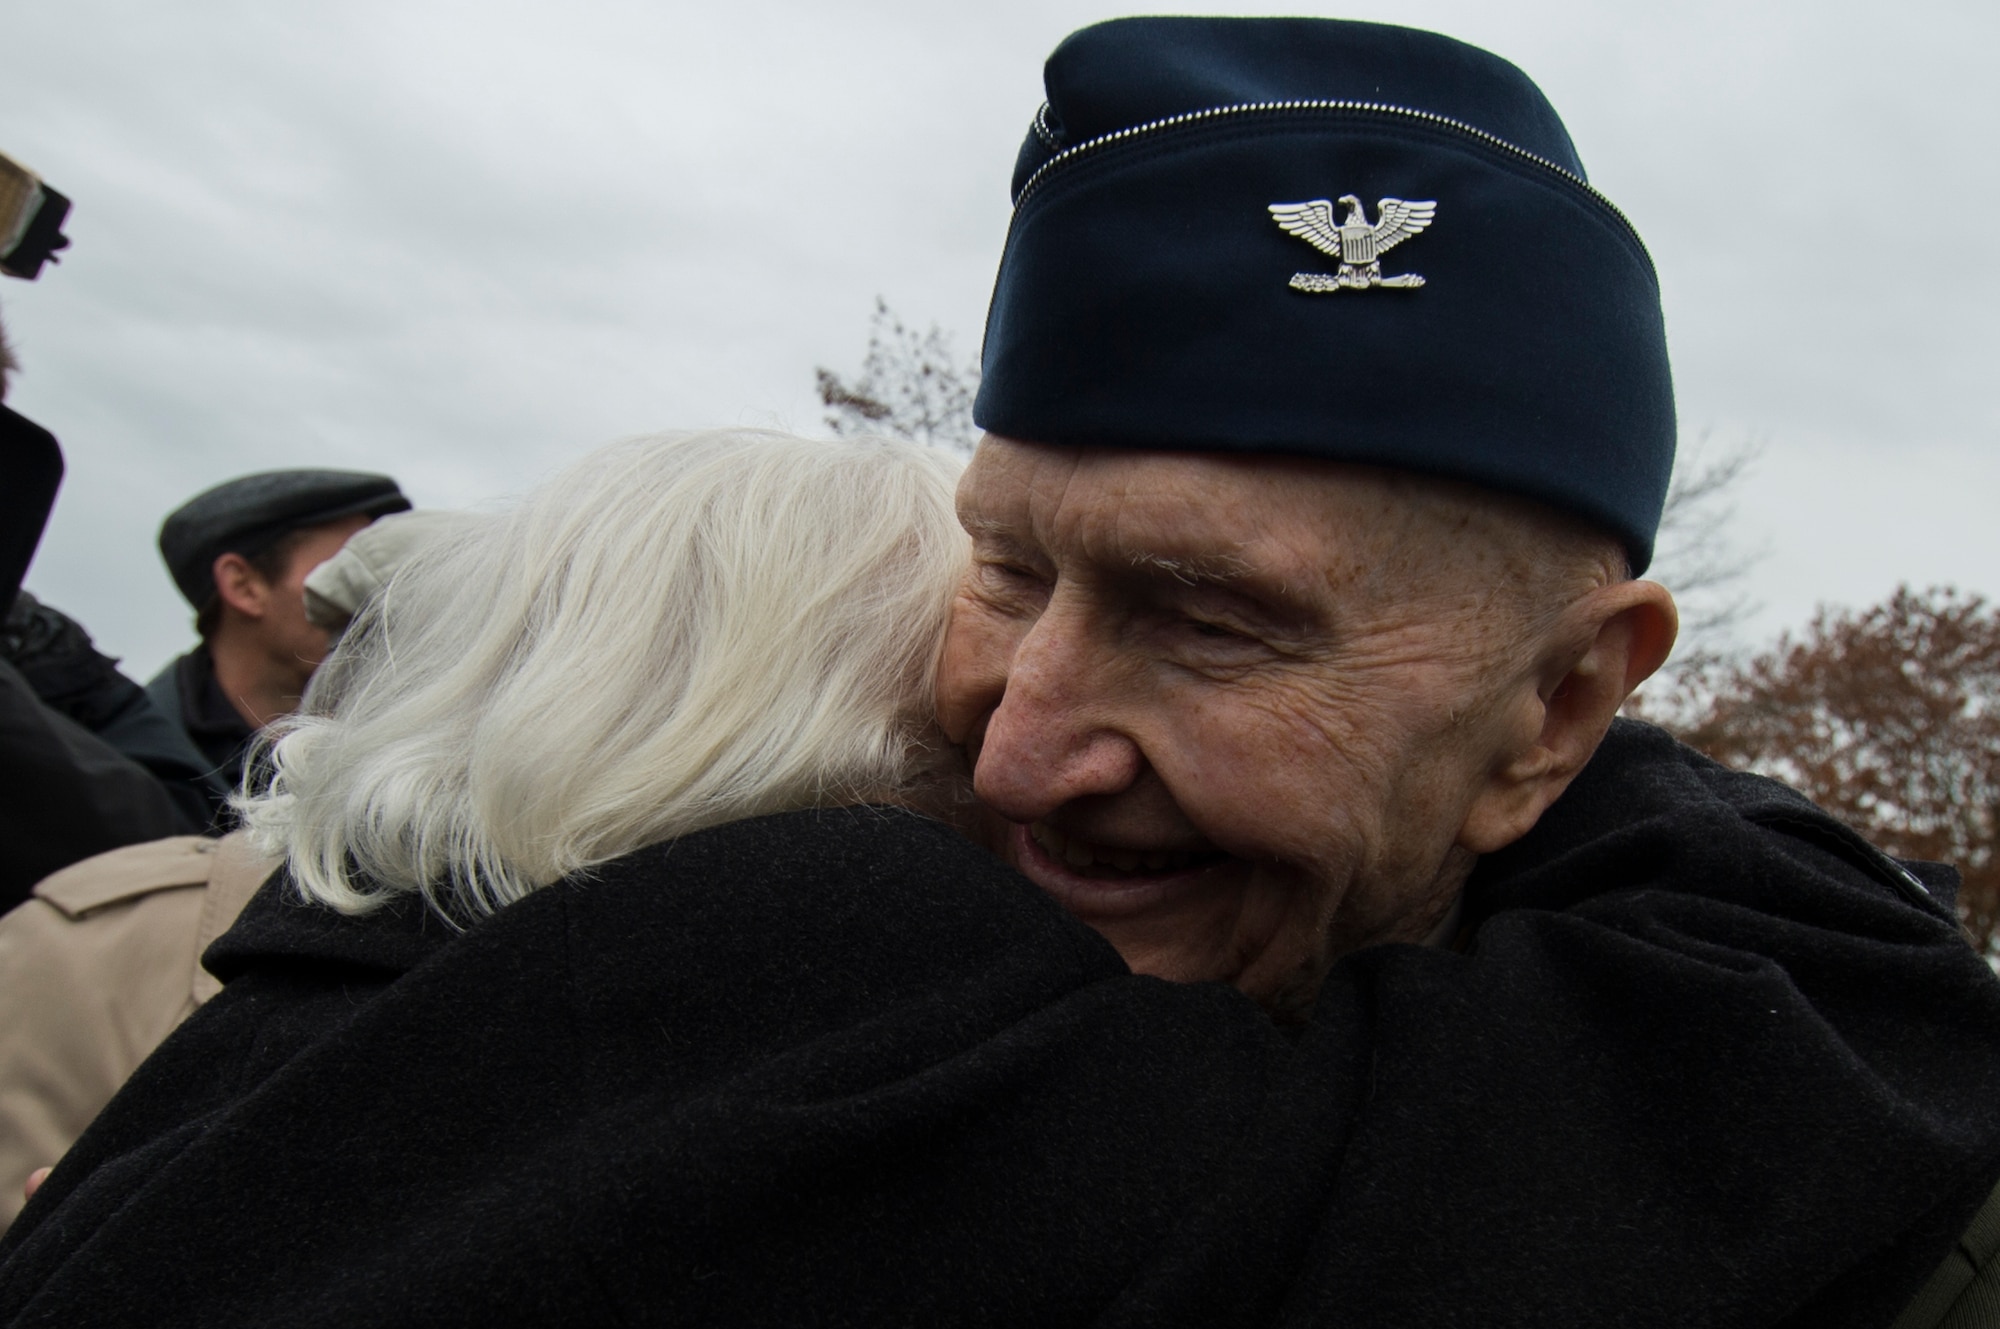 Retired U.S. Air Force Col. Gail Halvorsen, a C-52 Skymaster pilot also known as the Candy Bomber, hugs Gisela Rainare, a former civilian employee at the former Frankfurt an Main Air Base, Germany,  before the reopening ceremony of the Berlin Airlift Memorial outside Frankfurt International Airport, Germany, Nov. 22, 2016. Both Halvorsen and Rainare worked as part of the Berlin Airlift, also known as Operation Vittles, which delivered more than two million tons of food to the blockaded citizens of West Berlin between June 1948 and September 1949. (U.S. Air Force photo by Staff Sgt. Joe W. McFadden)